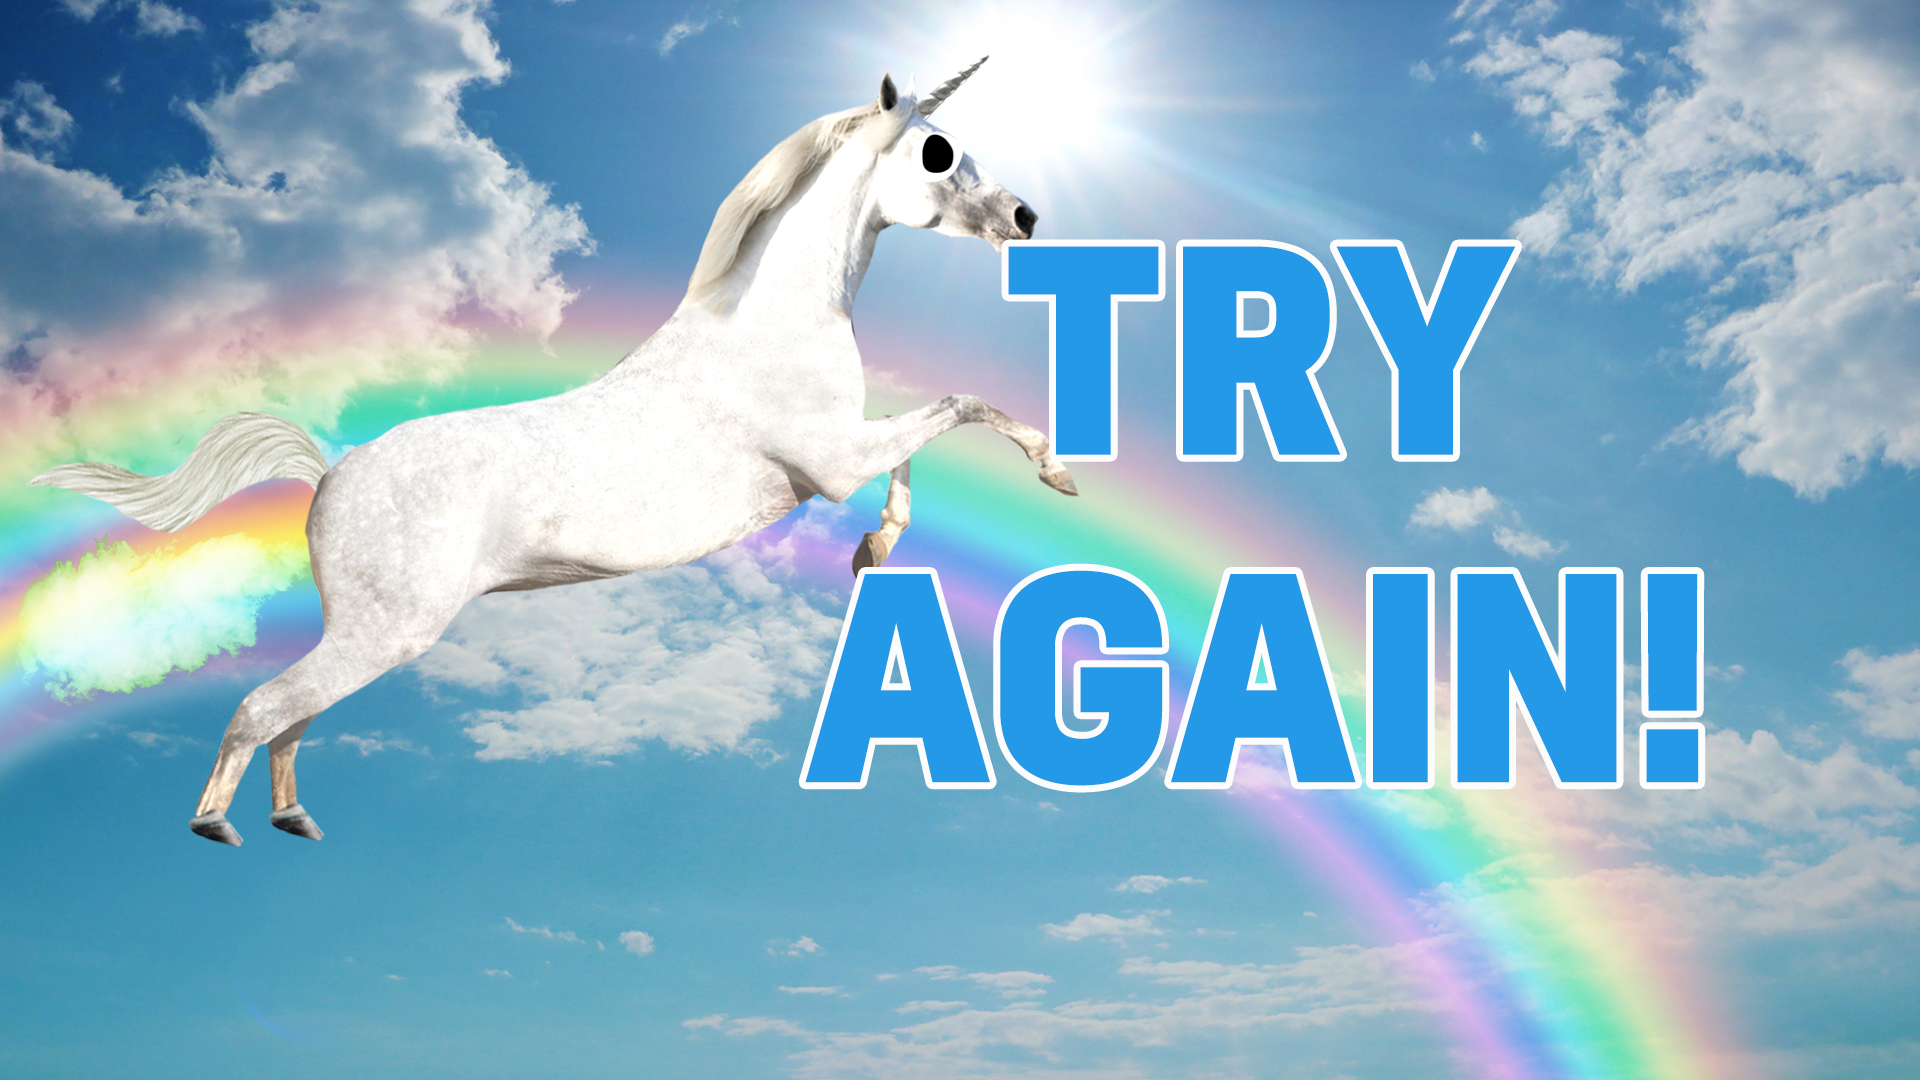 You tried, but you'll need to try harder to ace this Unicorn Academy quiz! Try again!